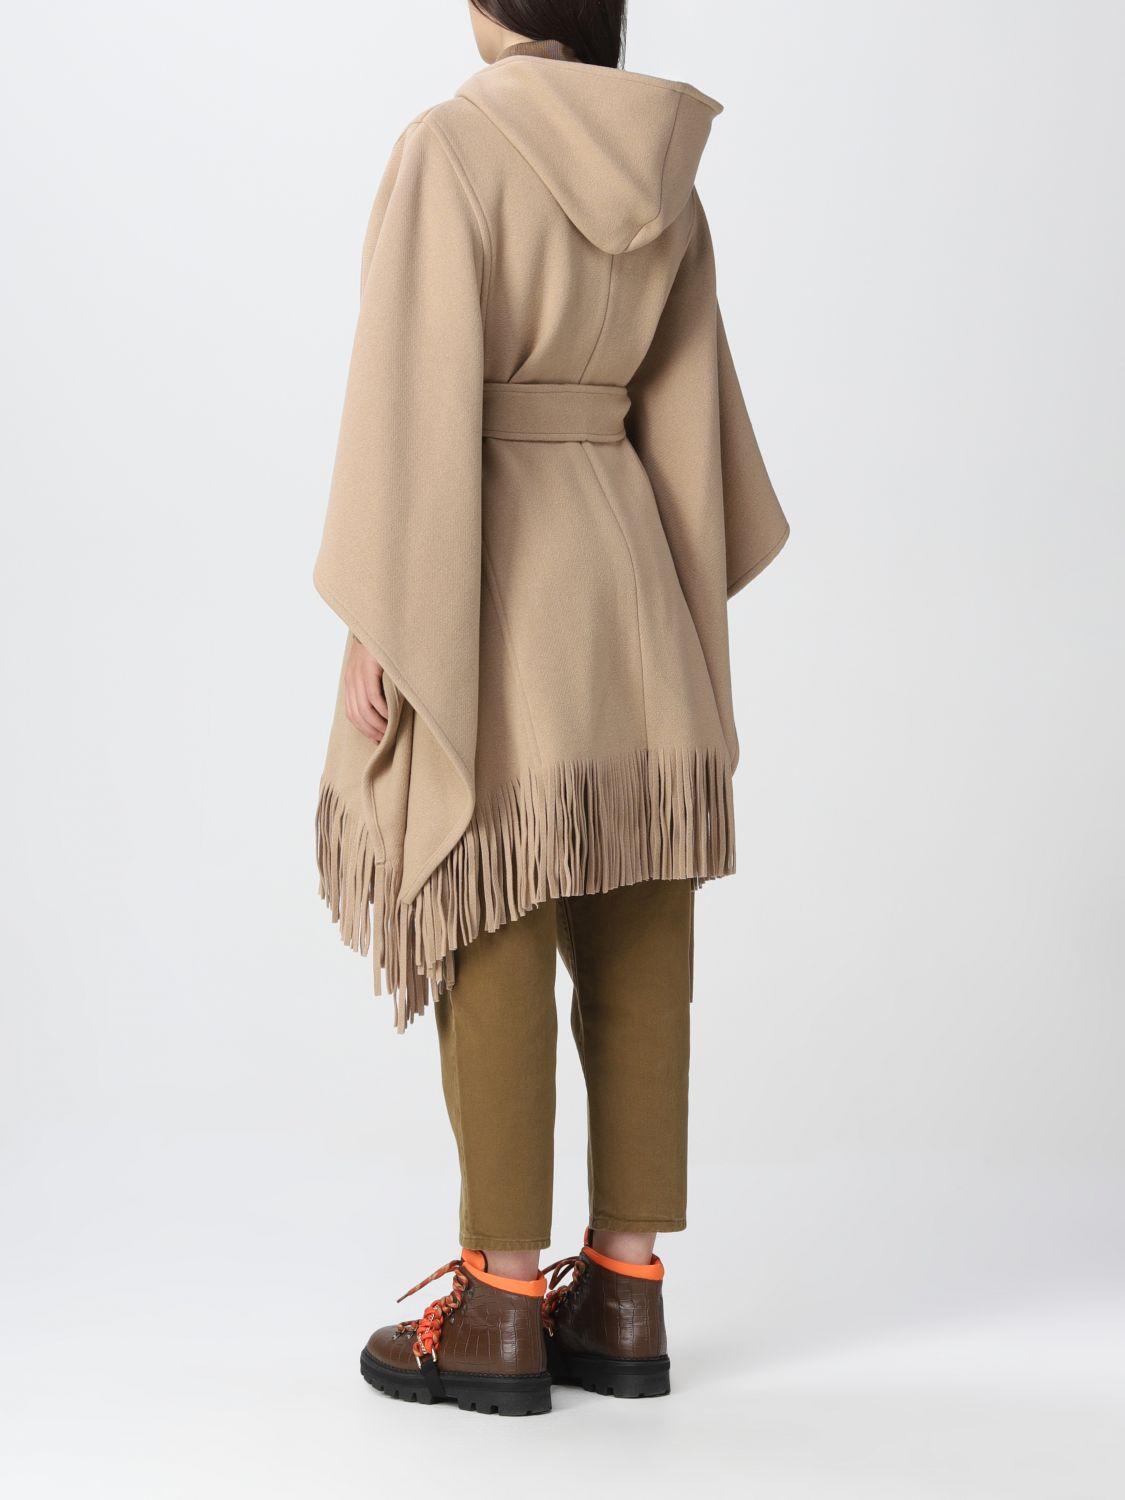 - Save 7% Natural Pinko Wool Coat With Hood And Fringes By in Beige Womens Coats Pinko Coats 